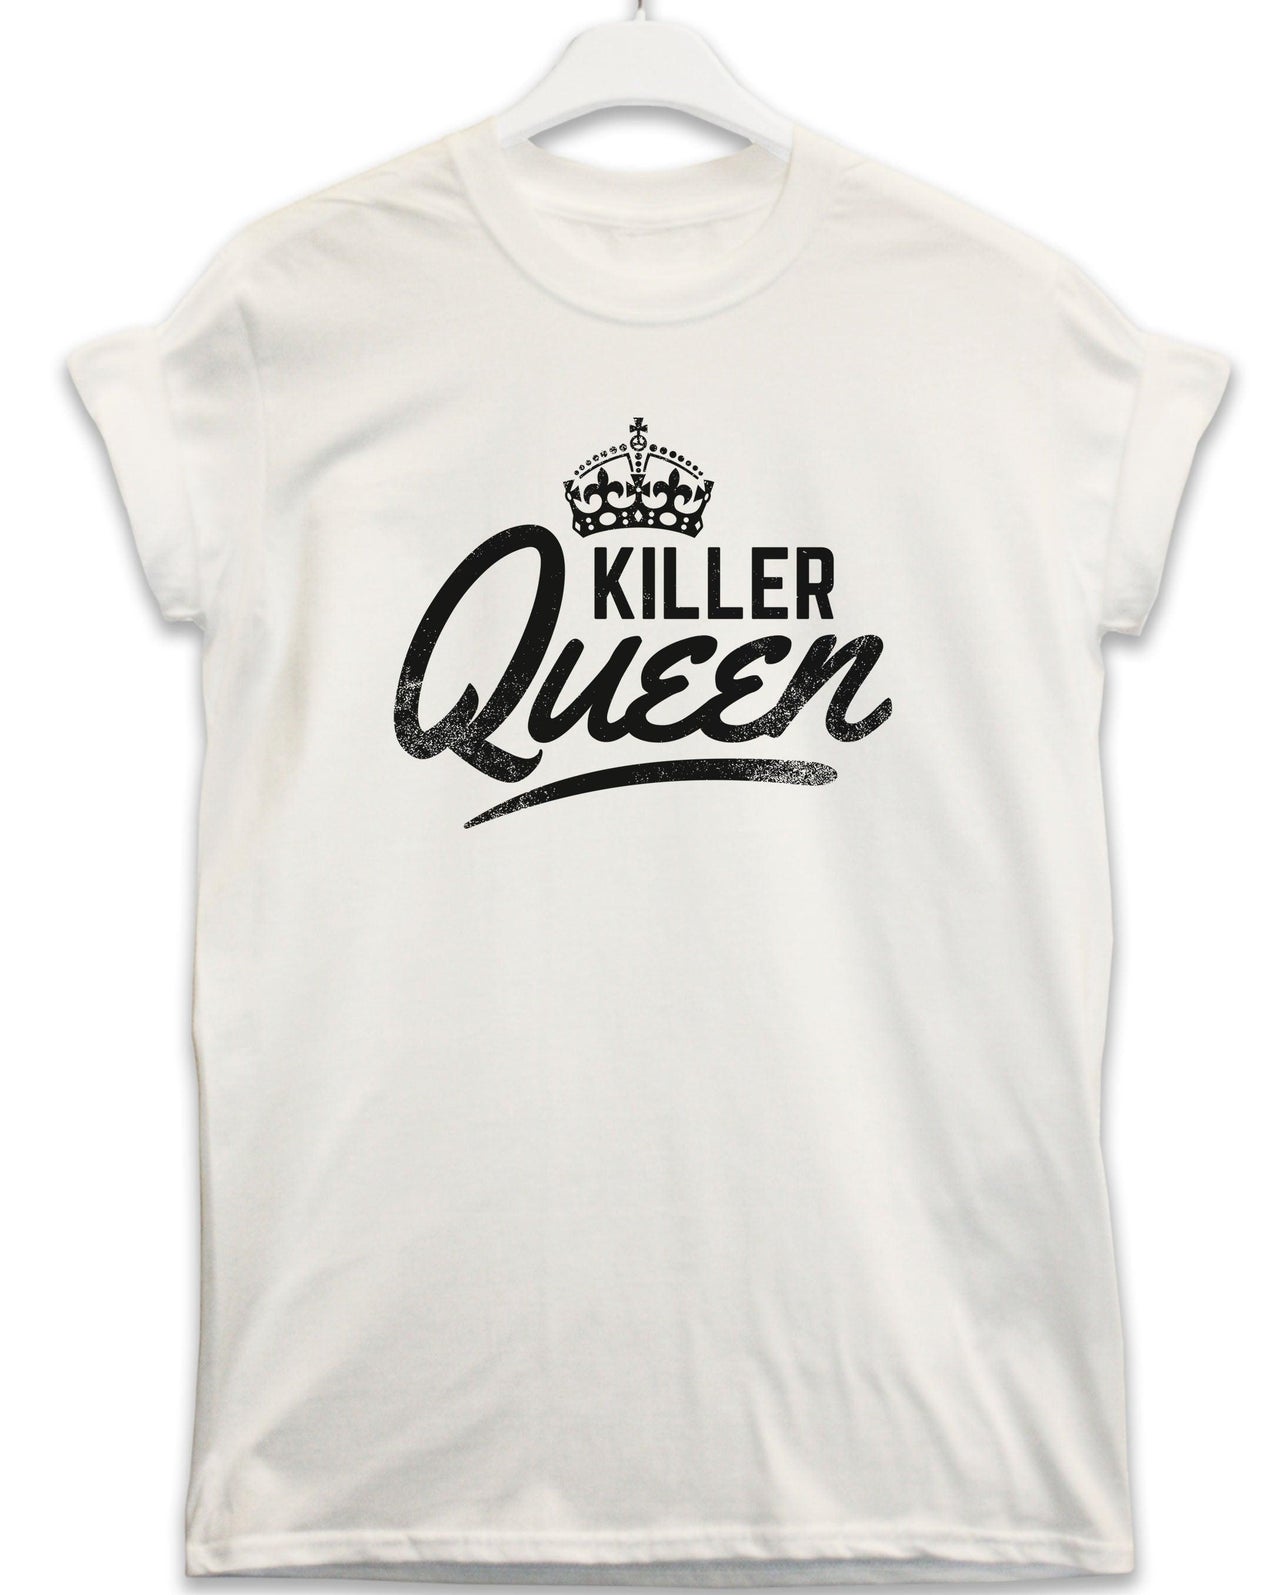 Killer Queen Lyric Quote Graphic T-Shirt For Men 8Ball